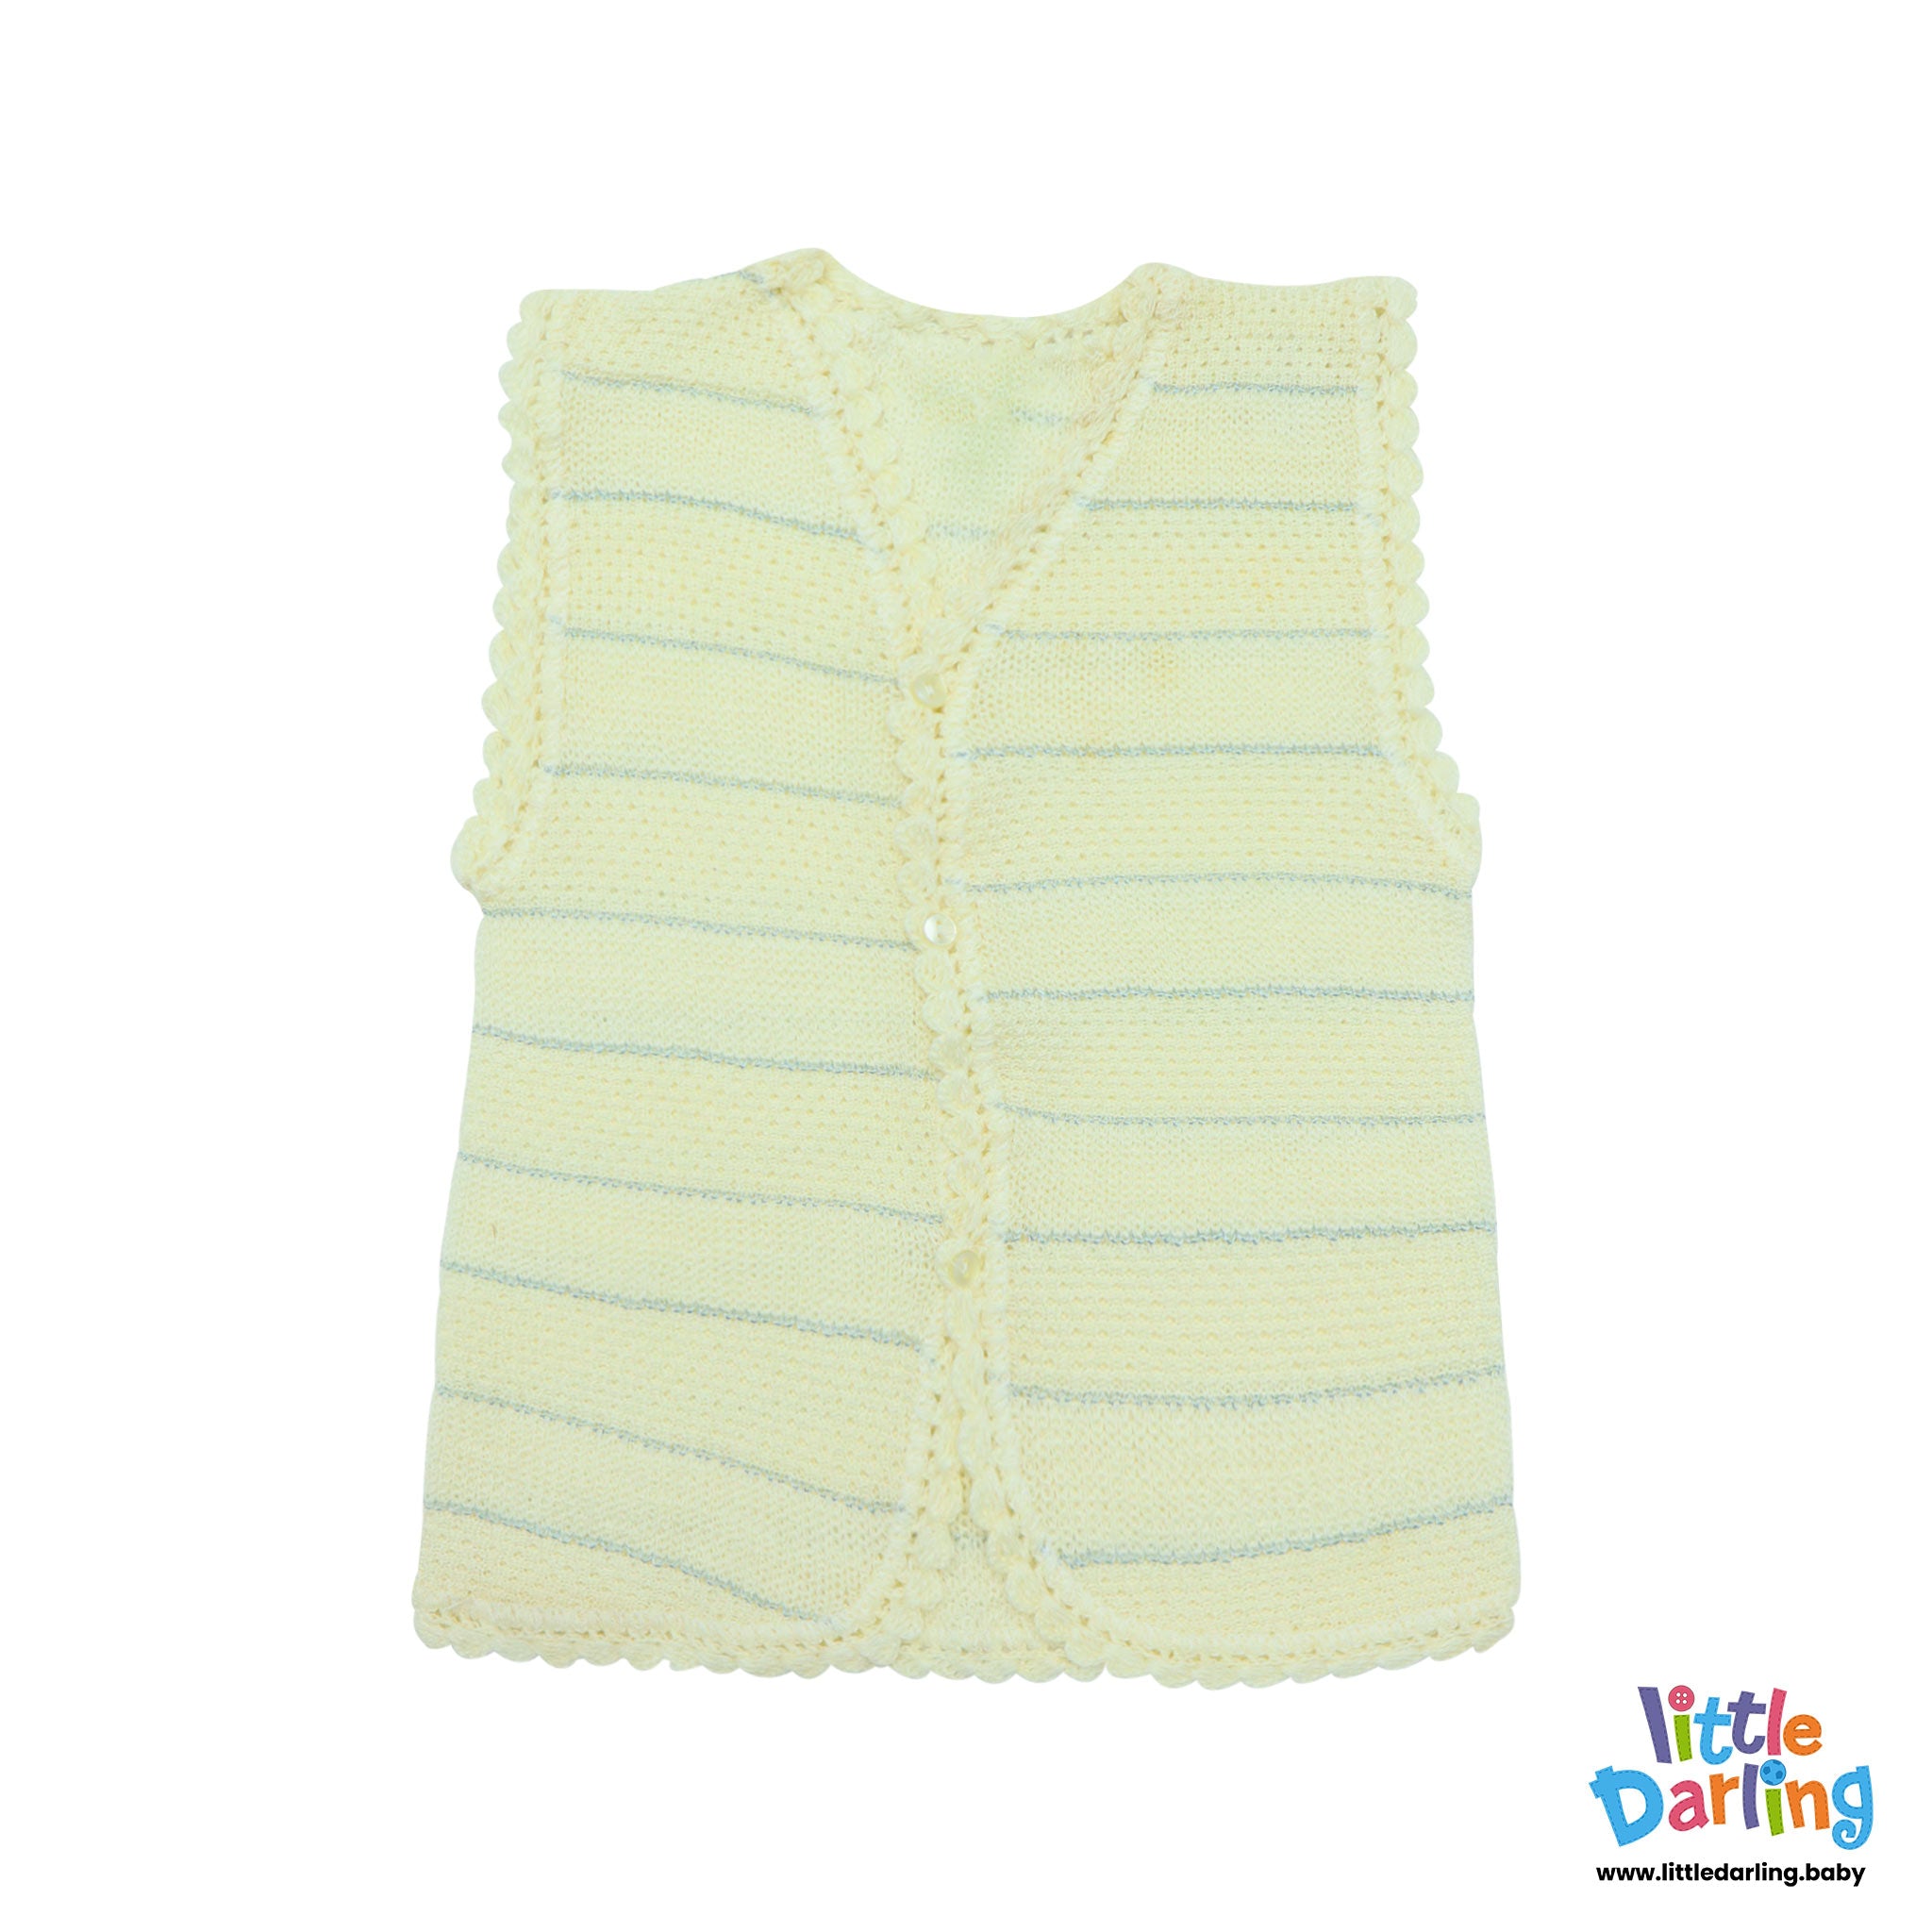 Woolen Sleeveless Vest Off White Color By Little Darling